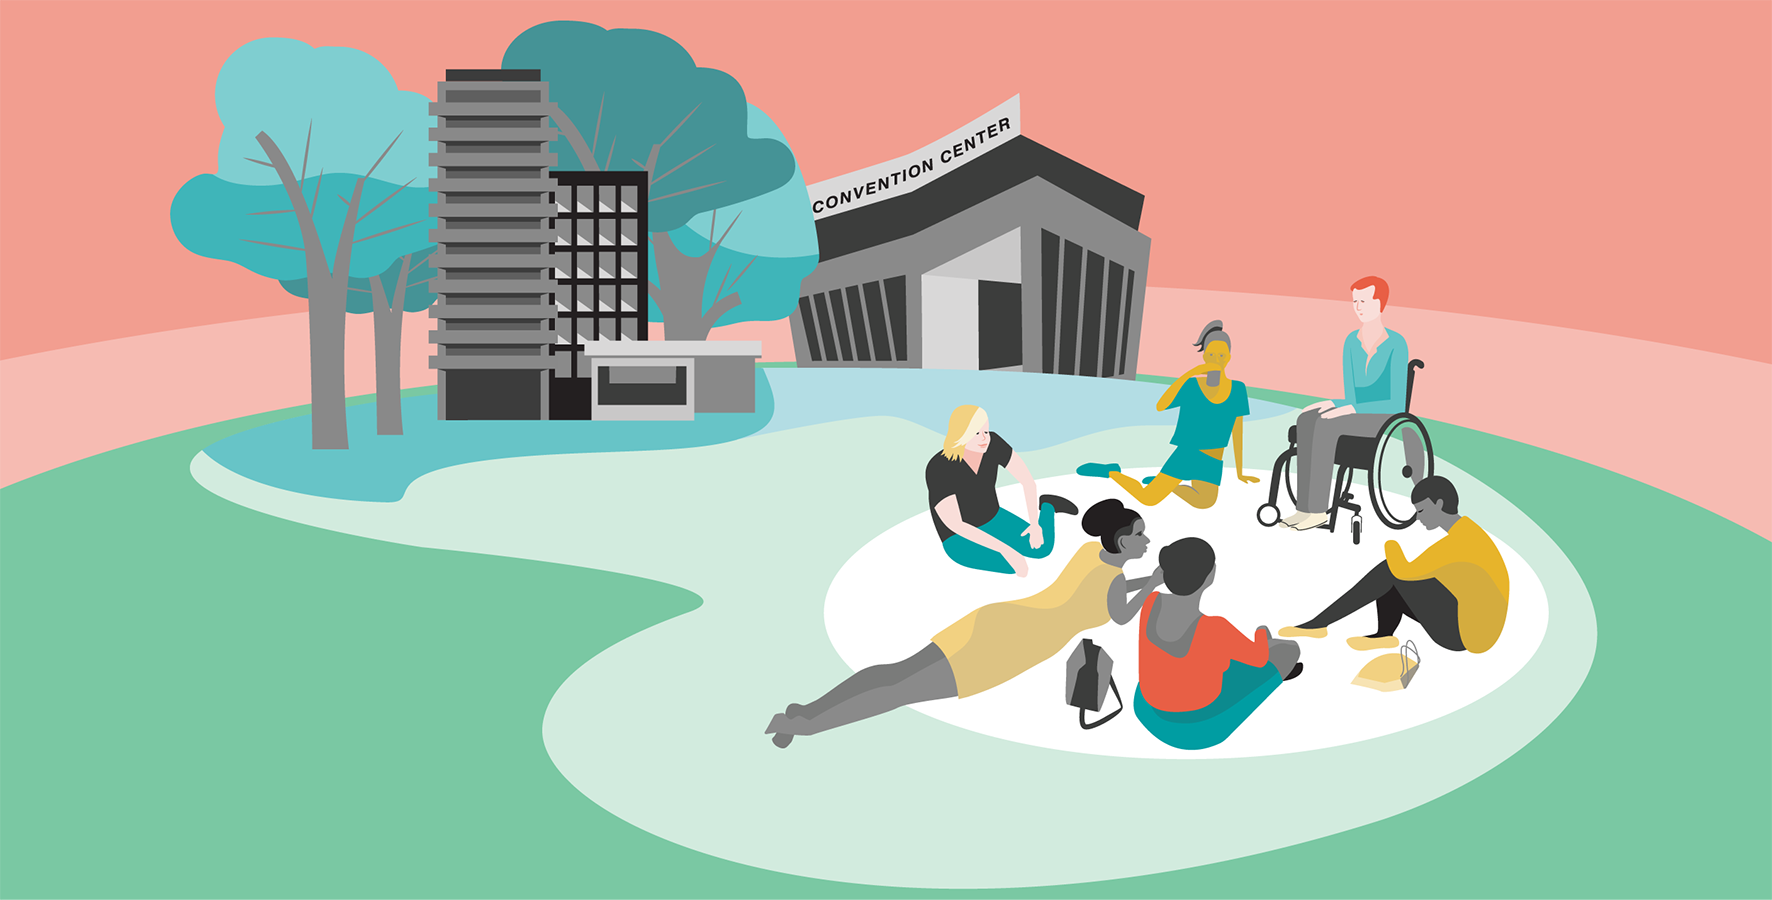 Illustration for a menu tab and header. A mixed group of people relax on park grass. One is in a wheelchair. They are organising together in front of buildings.